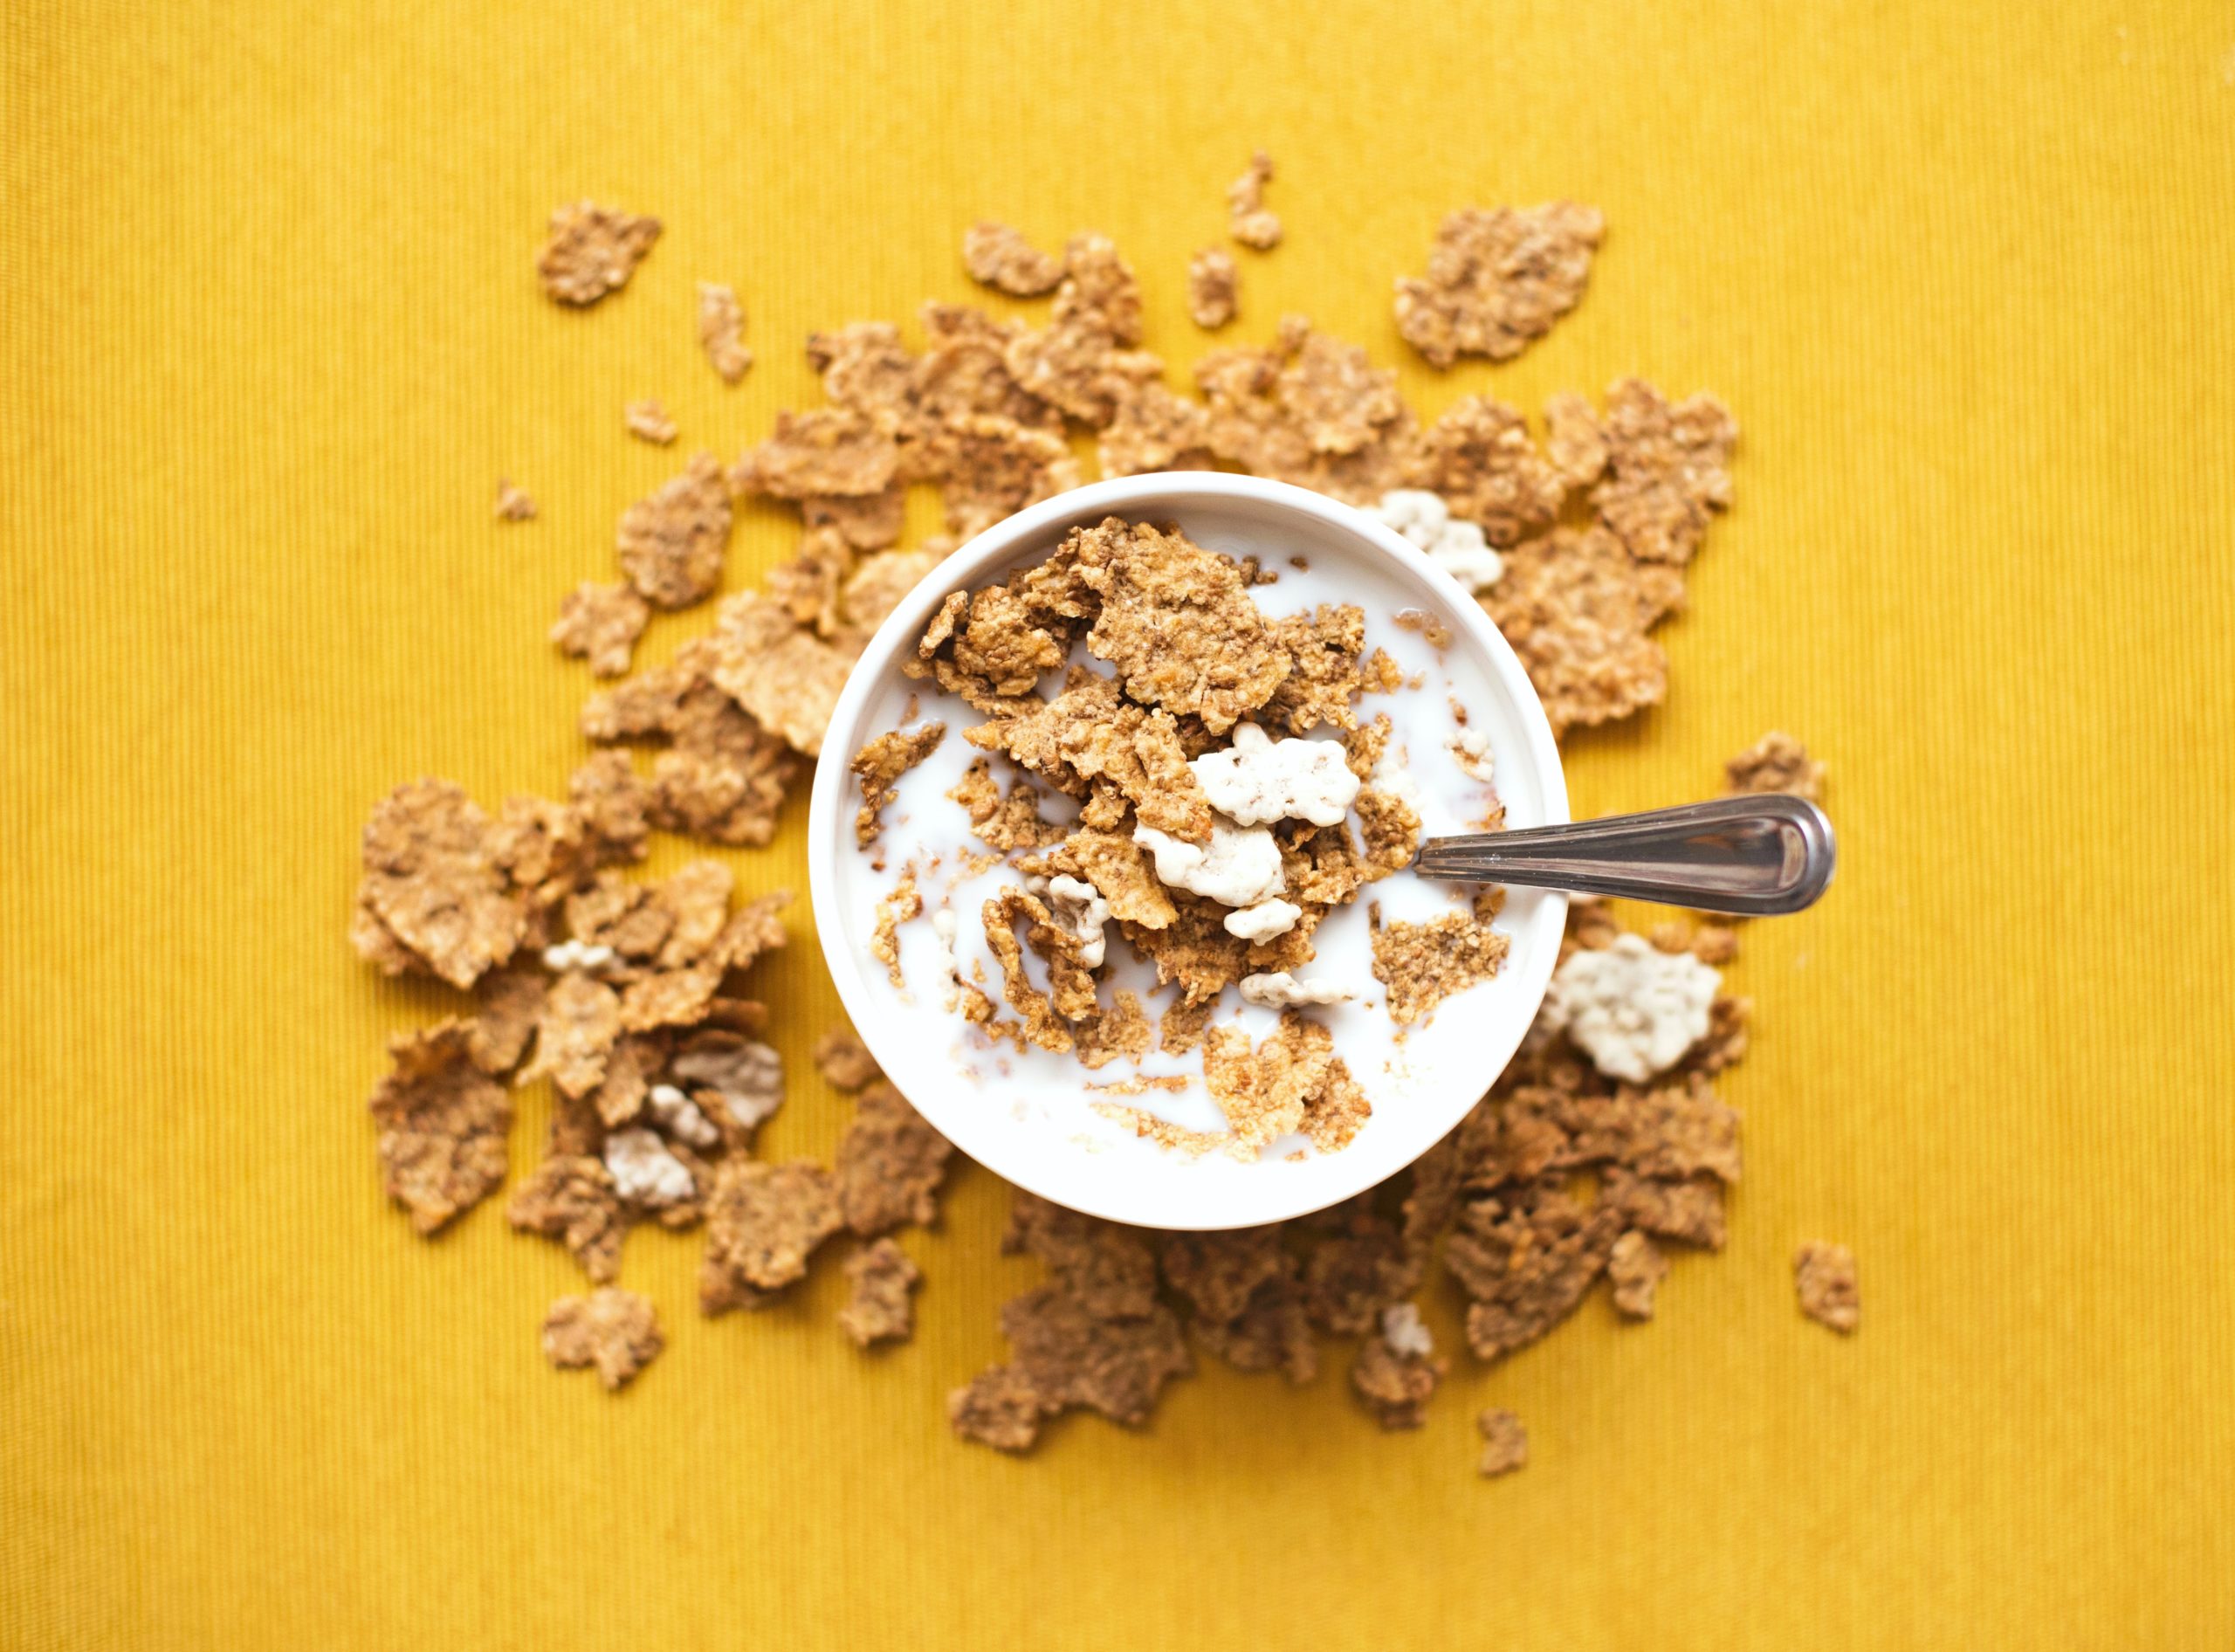 KIND Cereal Nutrition Facts